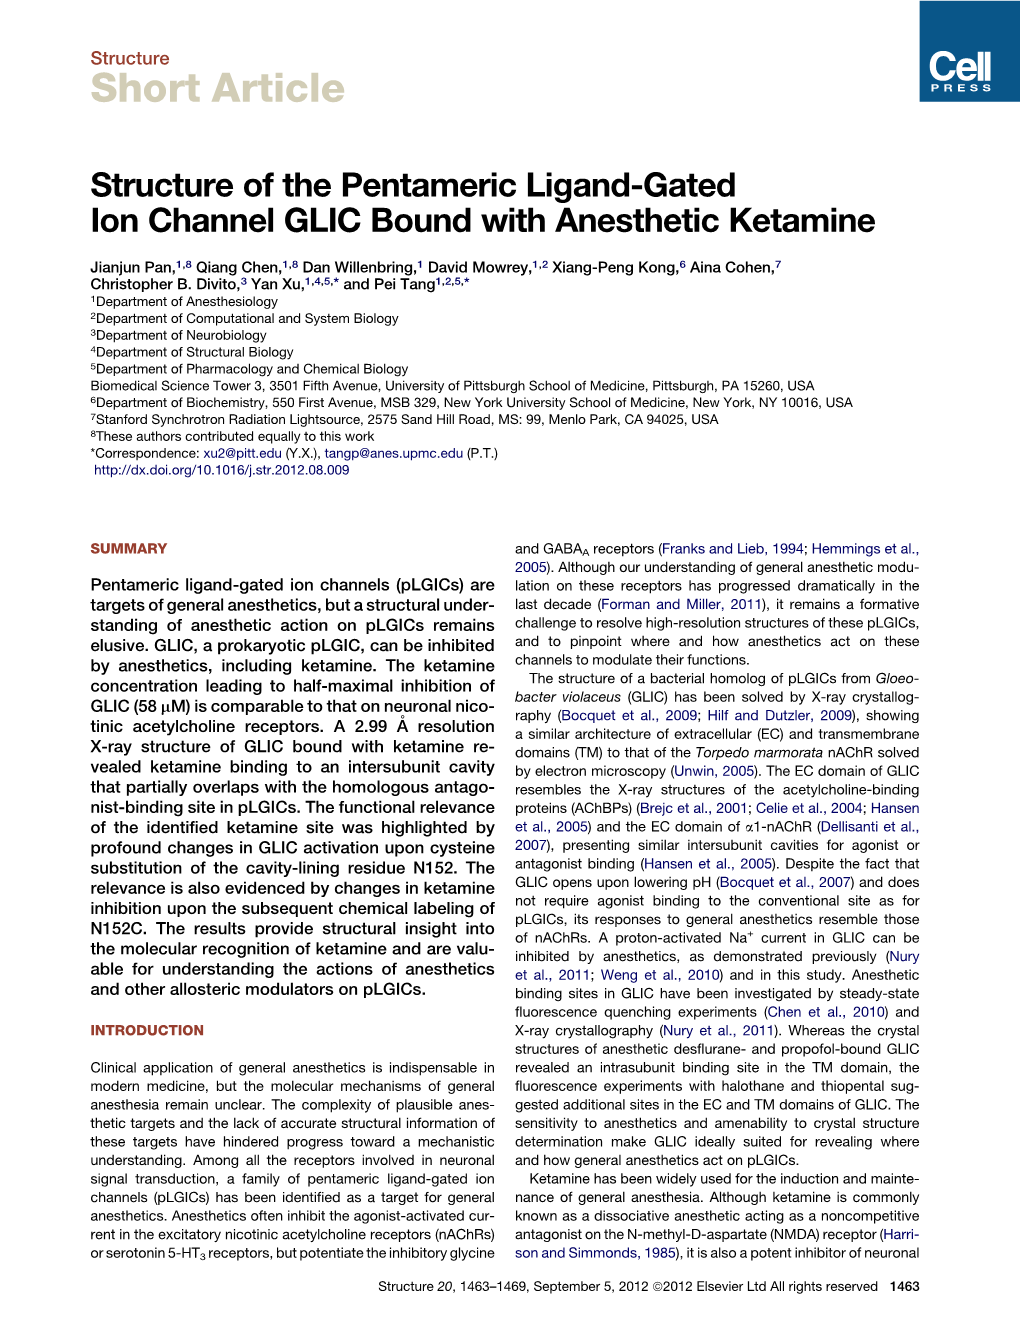 Structure of the Pentameric Ligand-Gated Ion Channel GLIC Bound with Anesthetic Ketamine